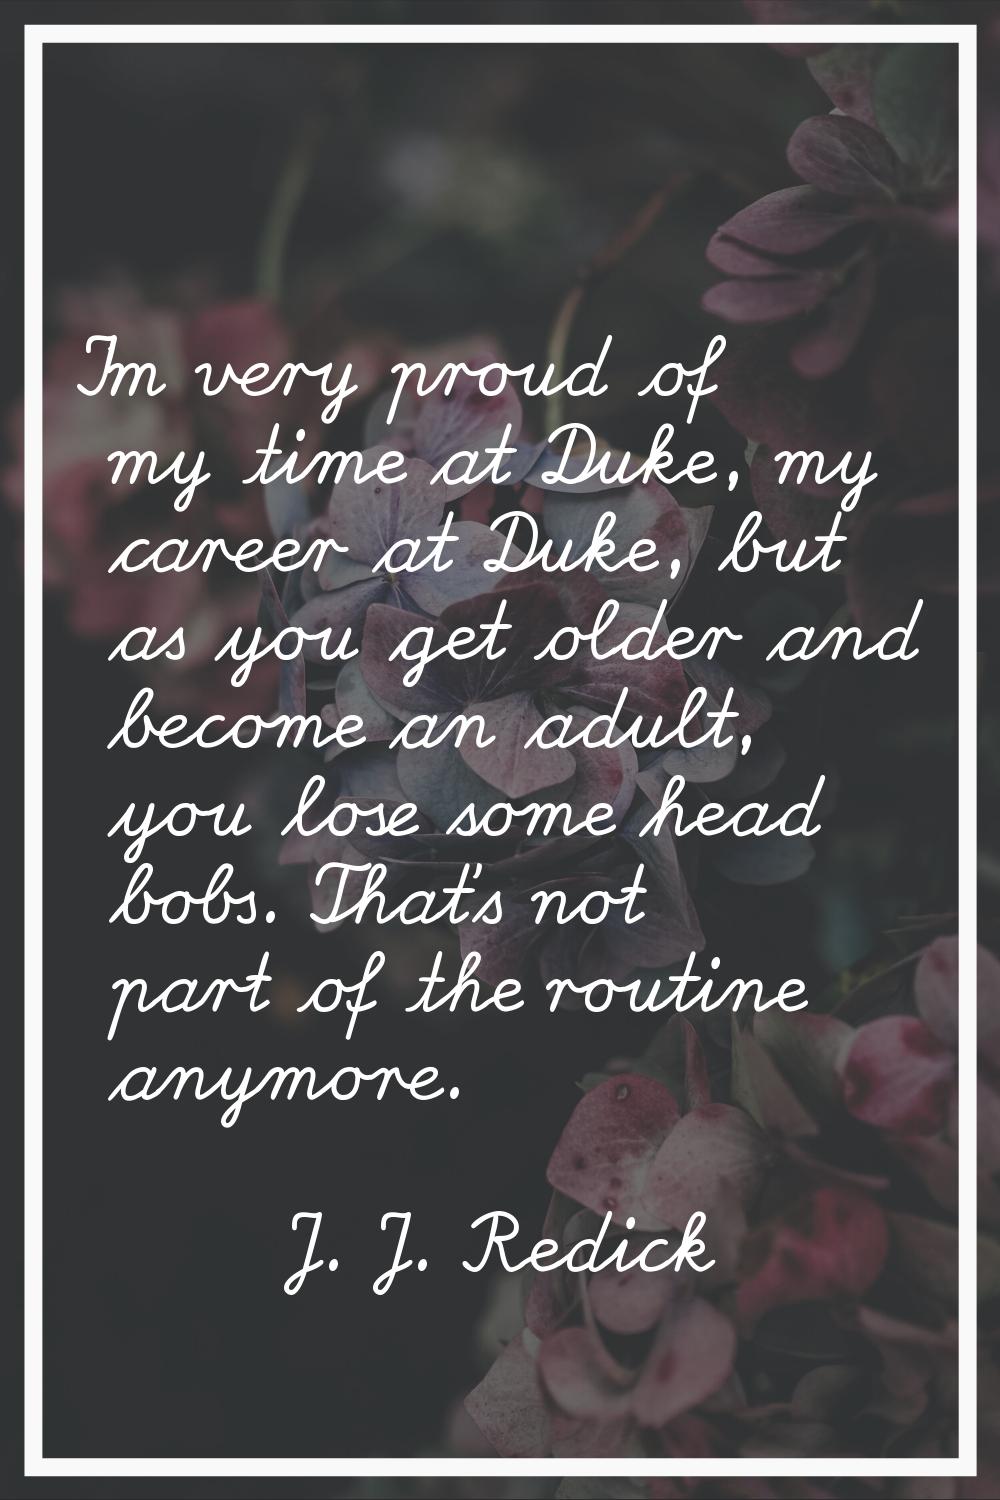 I'm very proud of my time at Duke, my career at Duke, but as you get older and become an adult, you